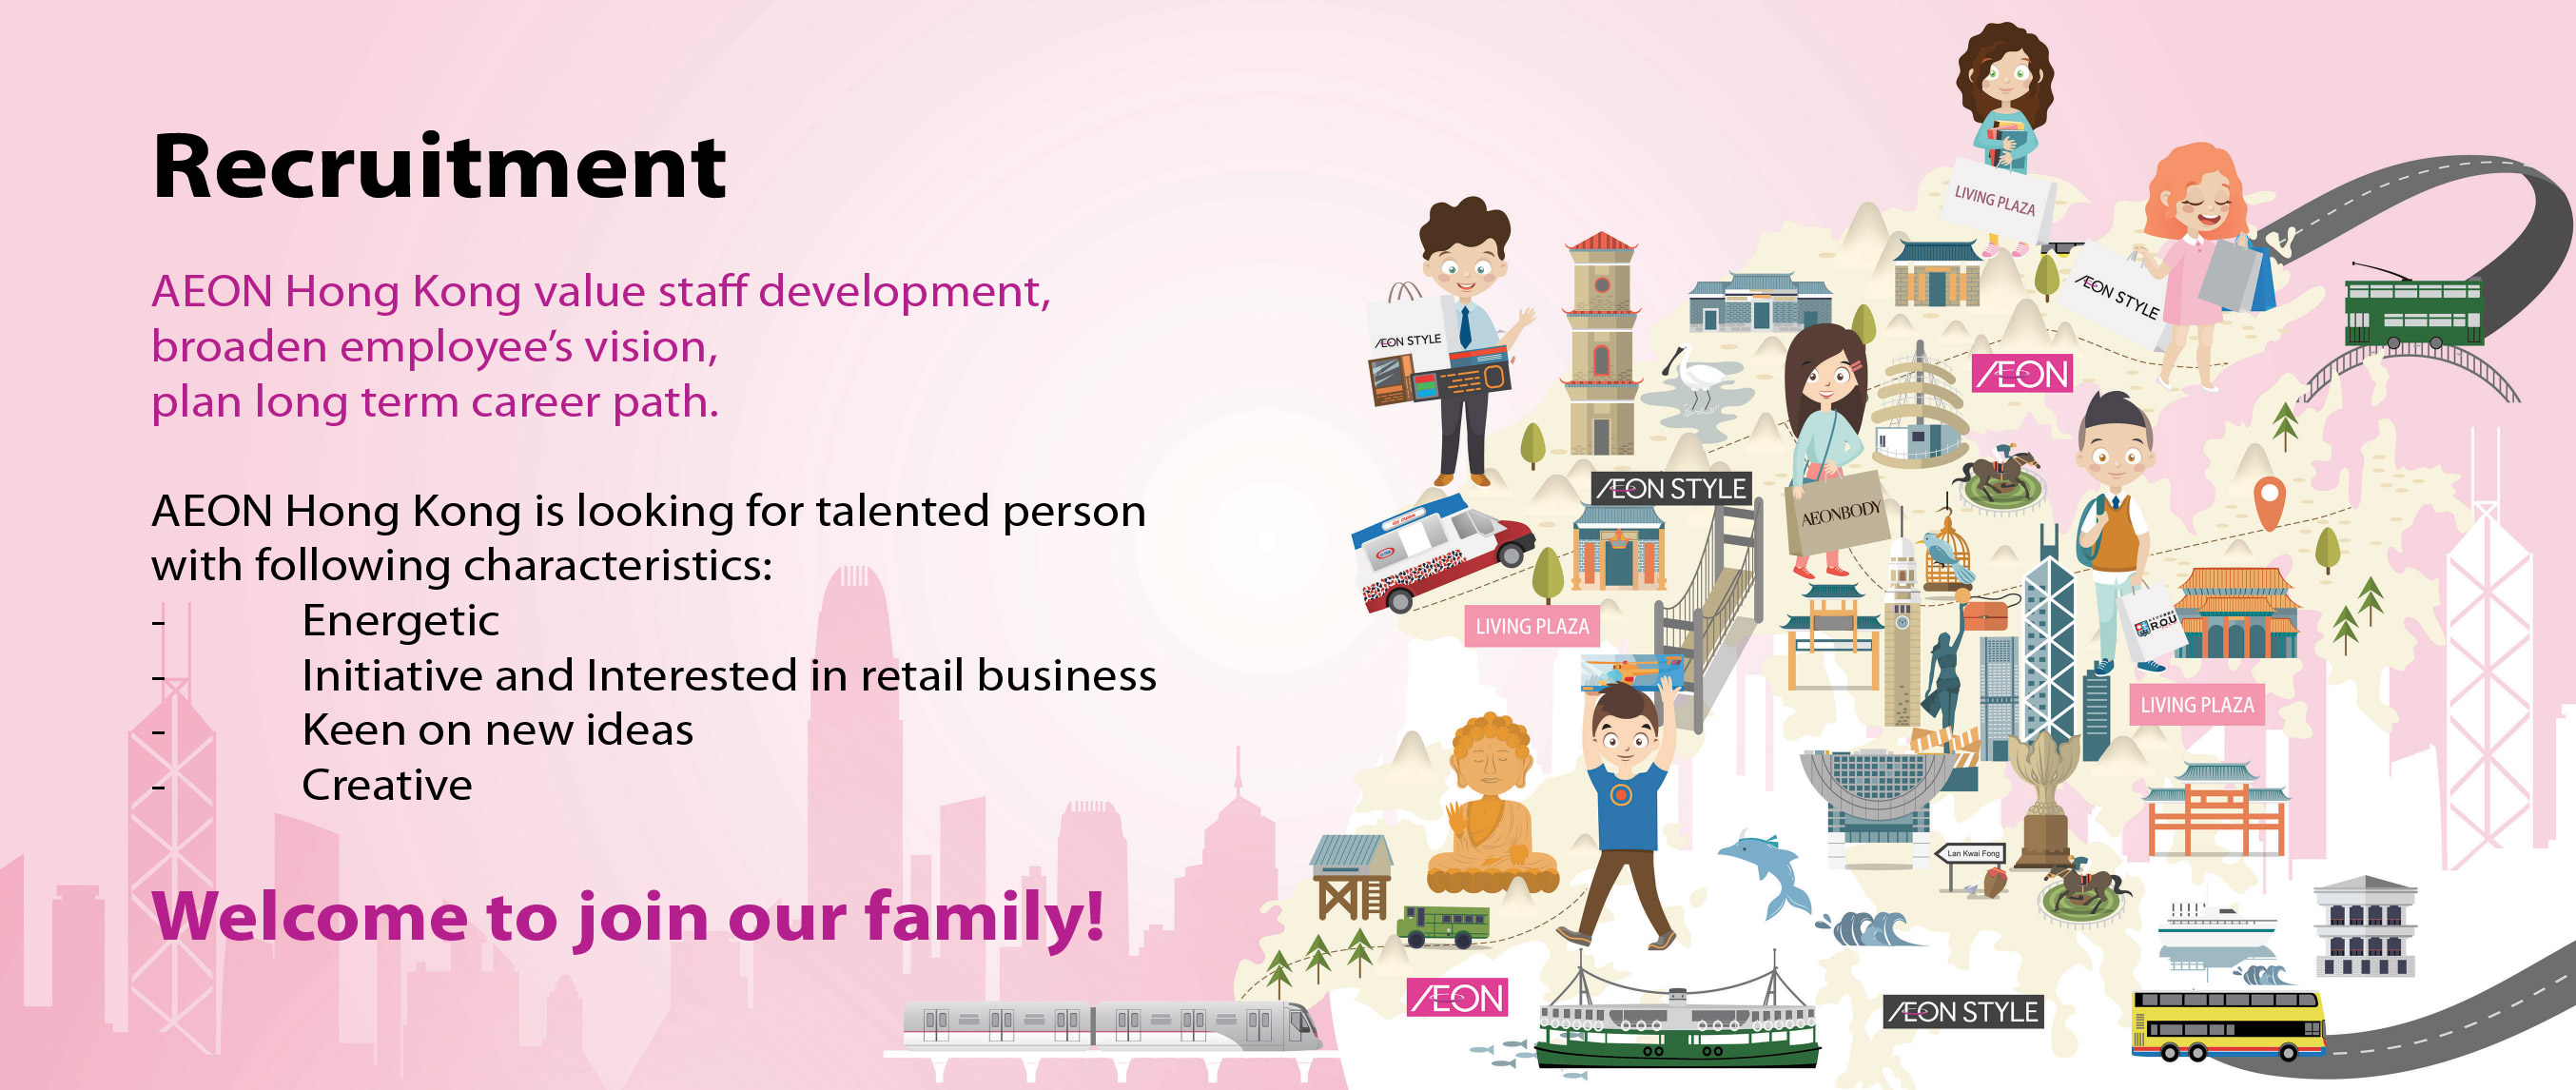 Recruitment AEON Hong Kong value staff development, broaden employees'vision, plan long term career path. AEON Hong Kong is looking for talented person with following characteristics:-Energetic -Initiative and Interested in retail business -Keen on new ideas -Creative Welcome to join us!